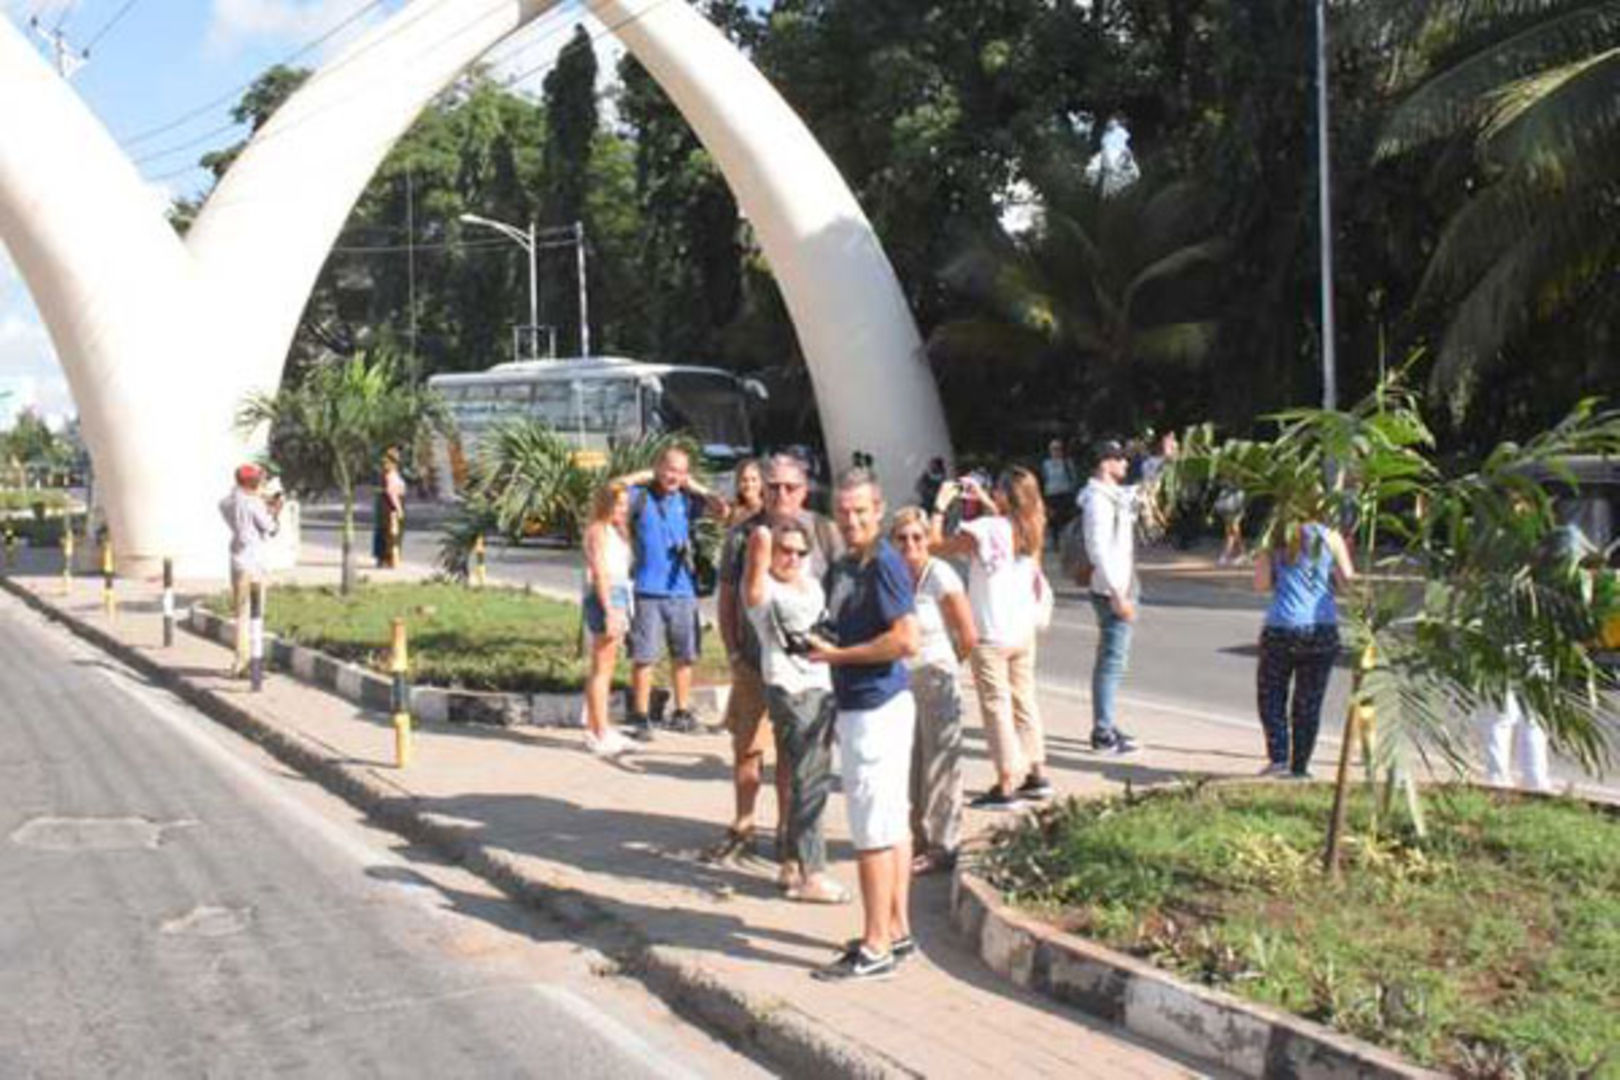 Symbolic Tusks Erected In 1952 To